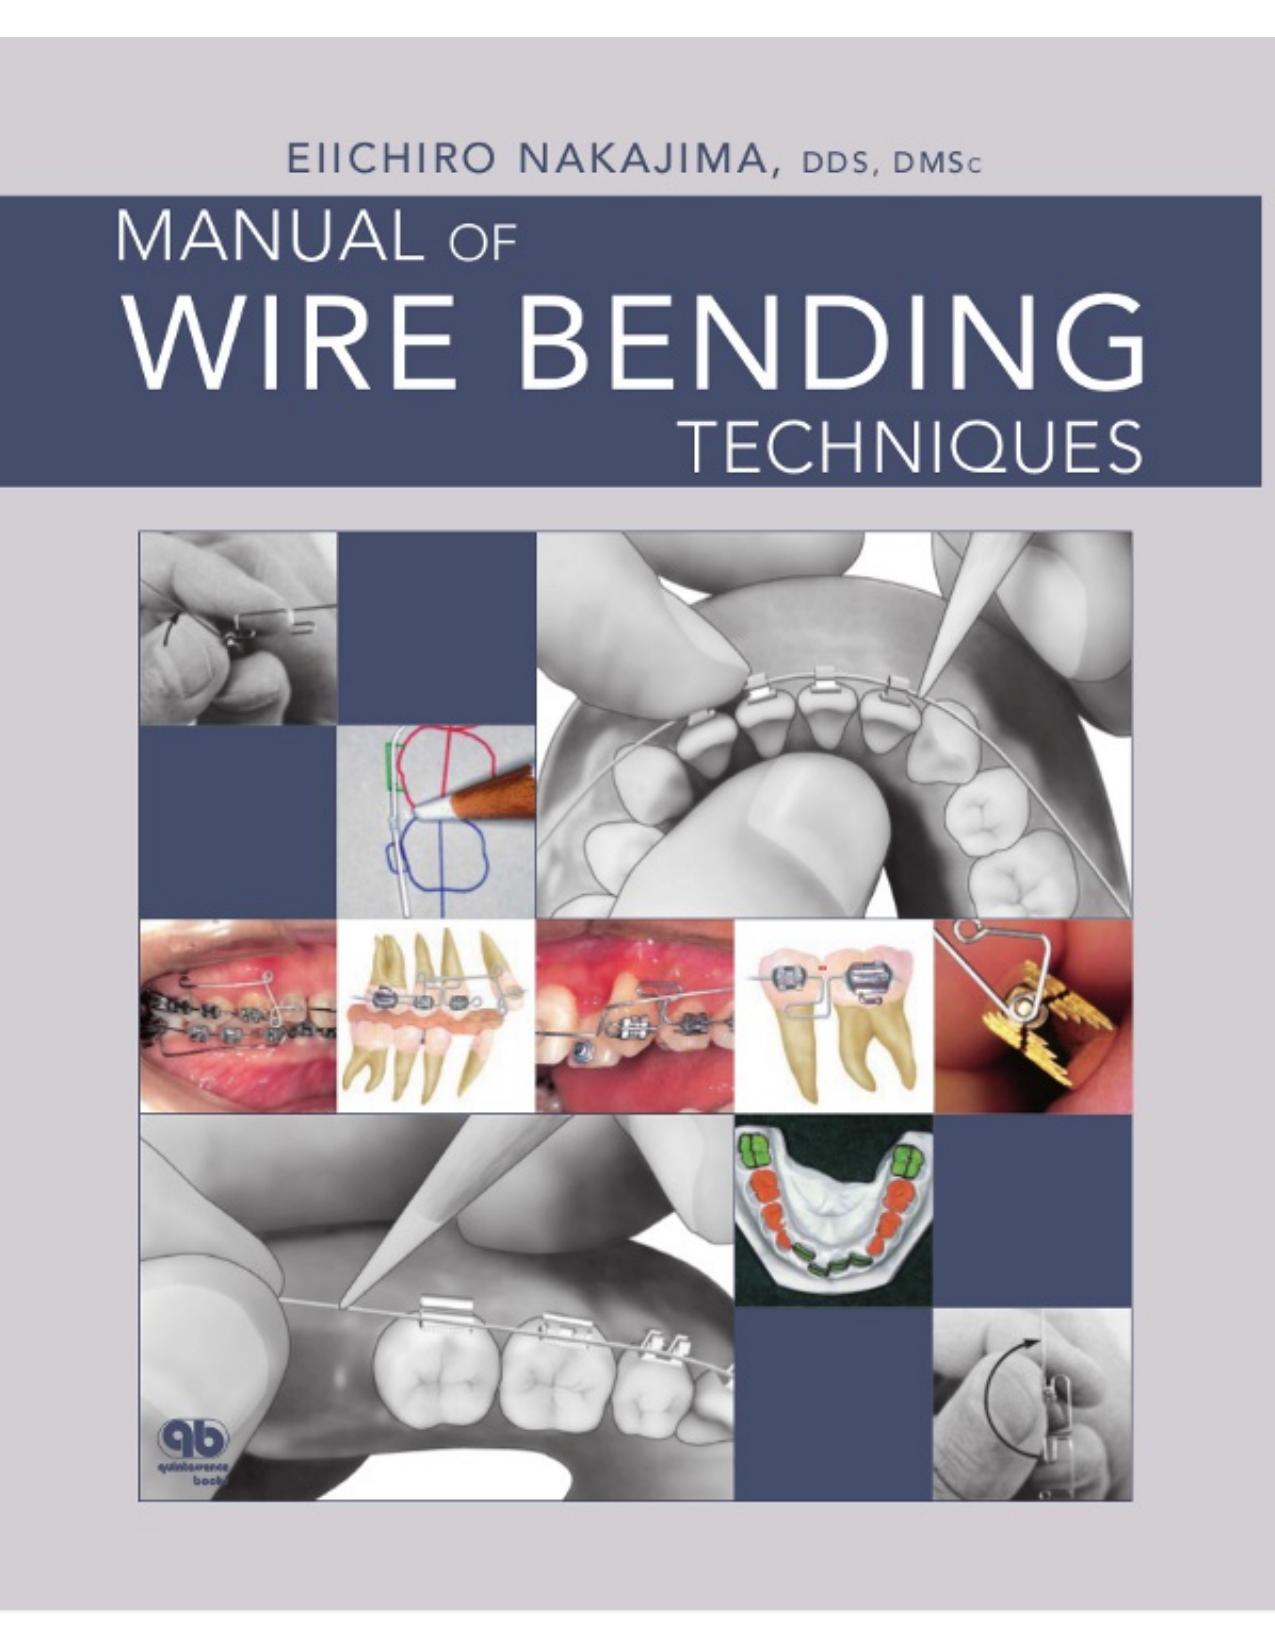 Manual of Wire Bending Techniques.jpg